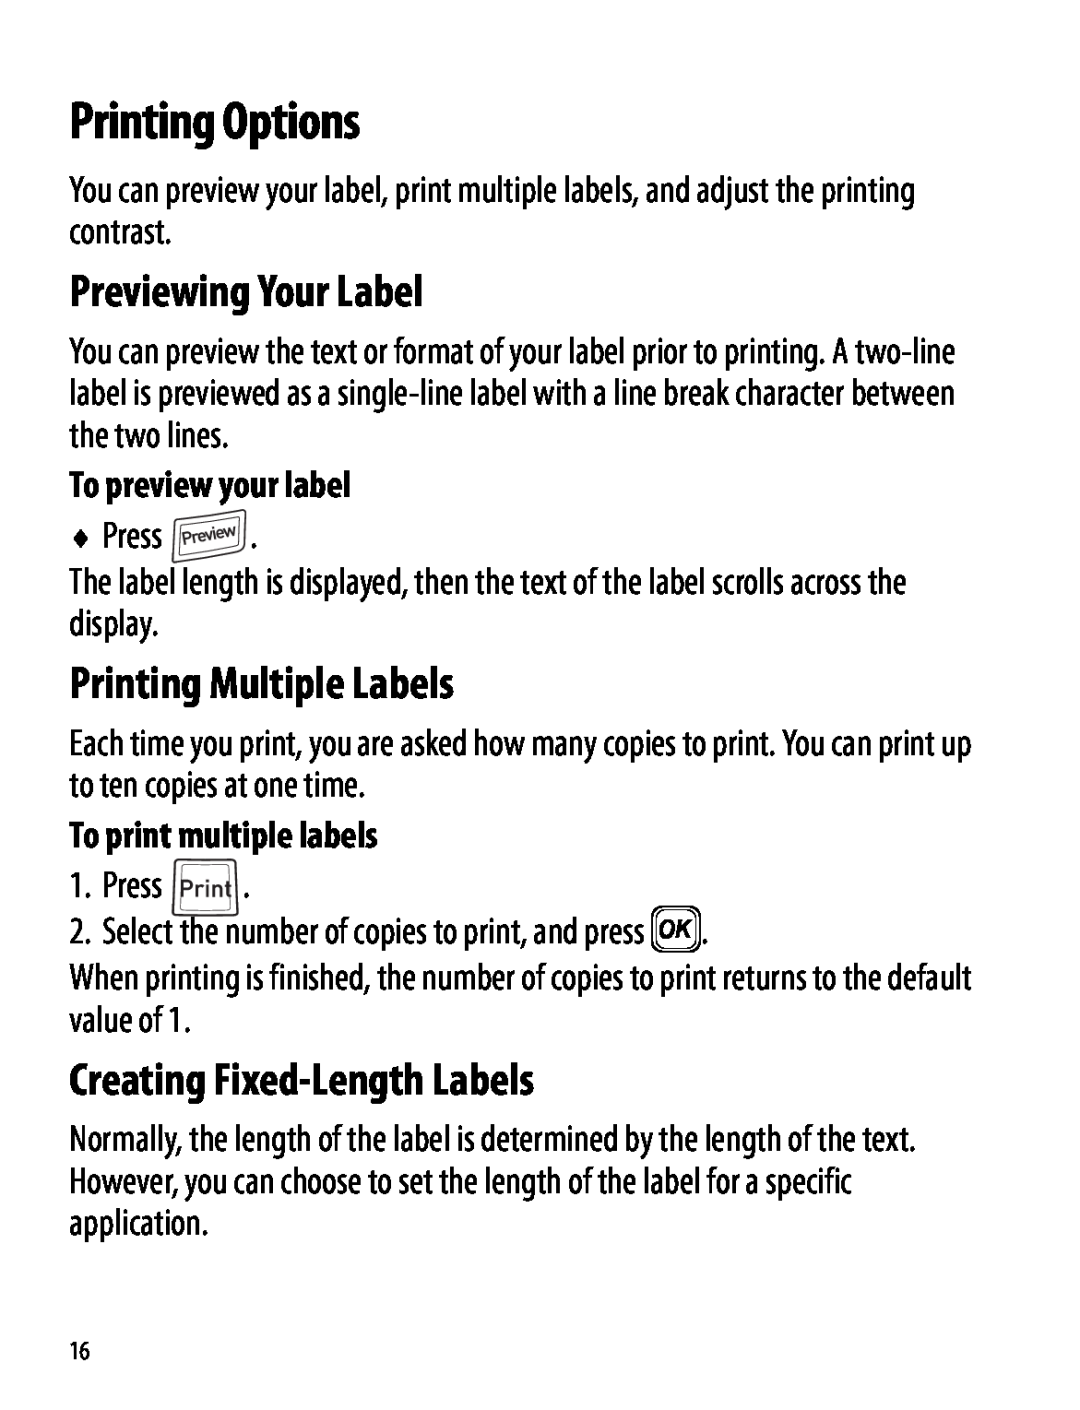 Dymo 220P manual Printing Options, Previewing Your Label, Printing Multiple Labels, Creating Fixed-Length Labels 